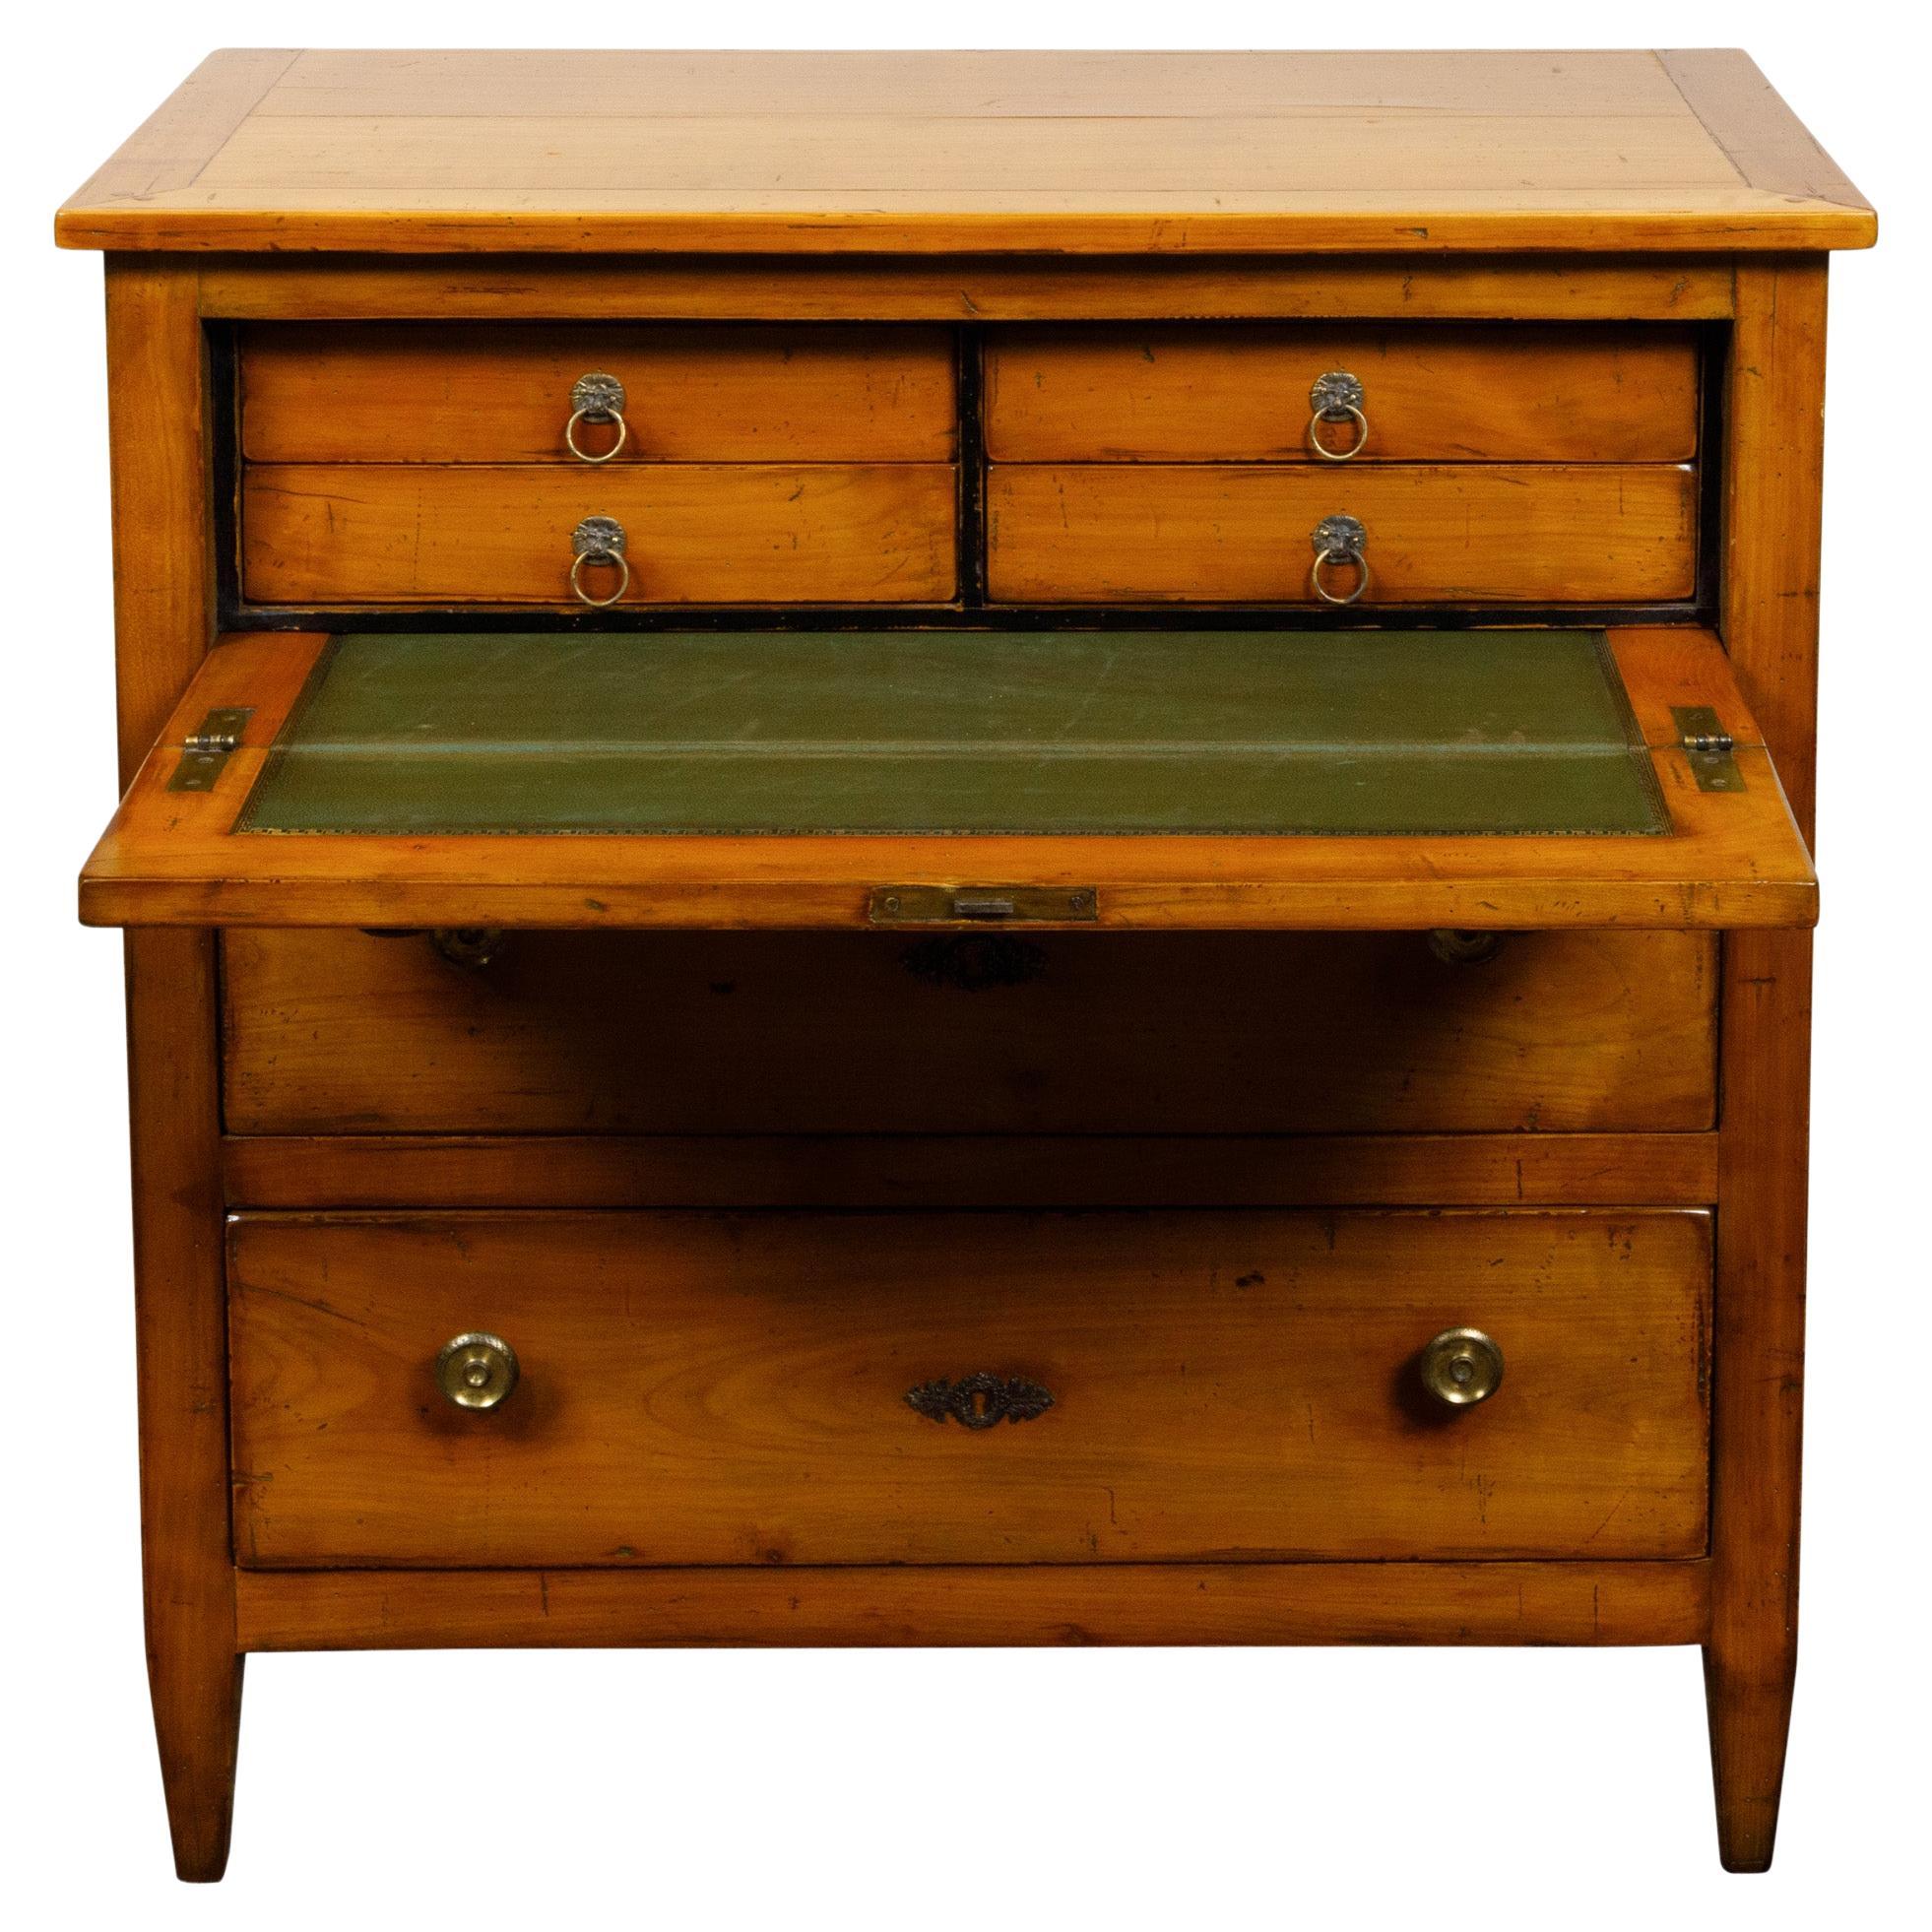 French Empire Style 19th Century Walnut Chest with Drop Front Desk, Two Drawers